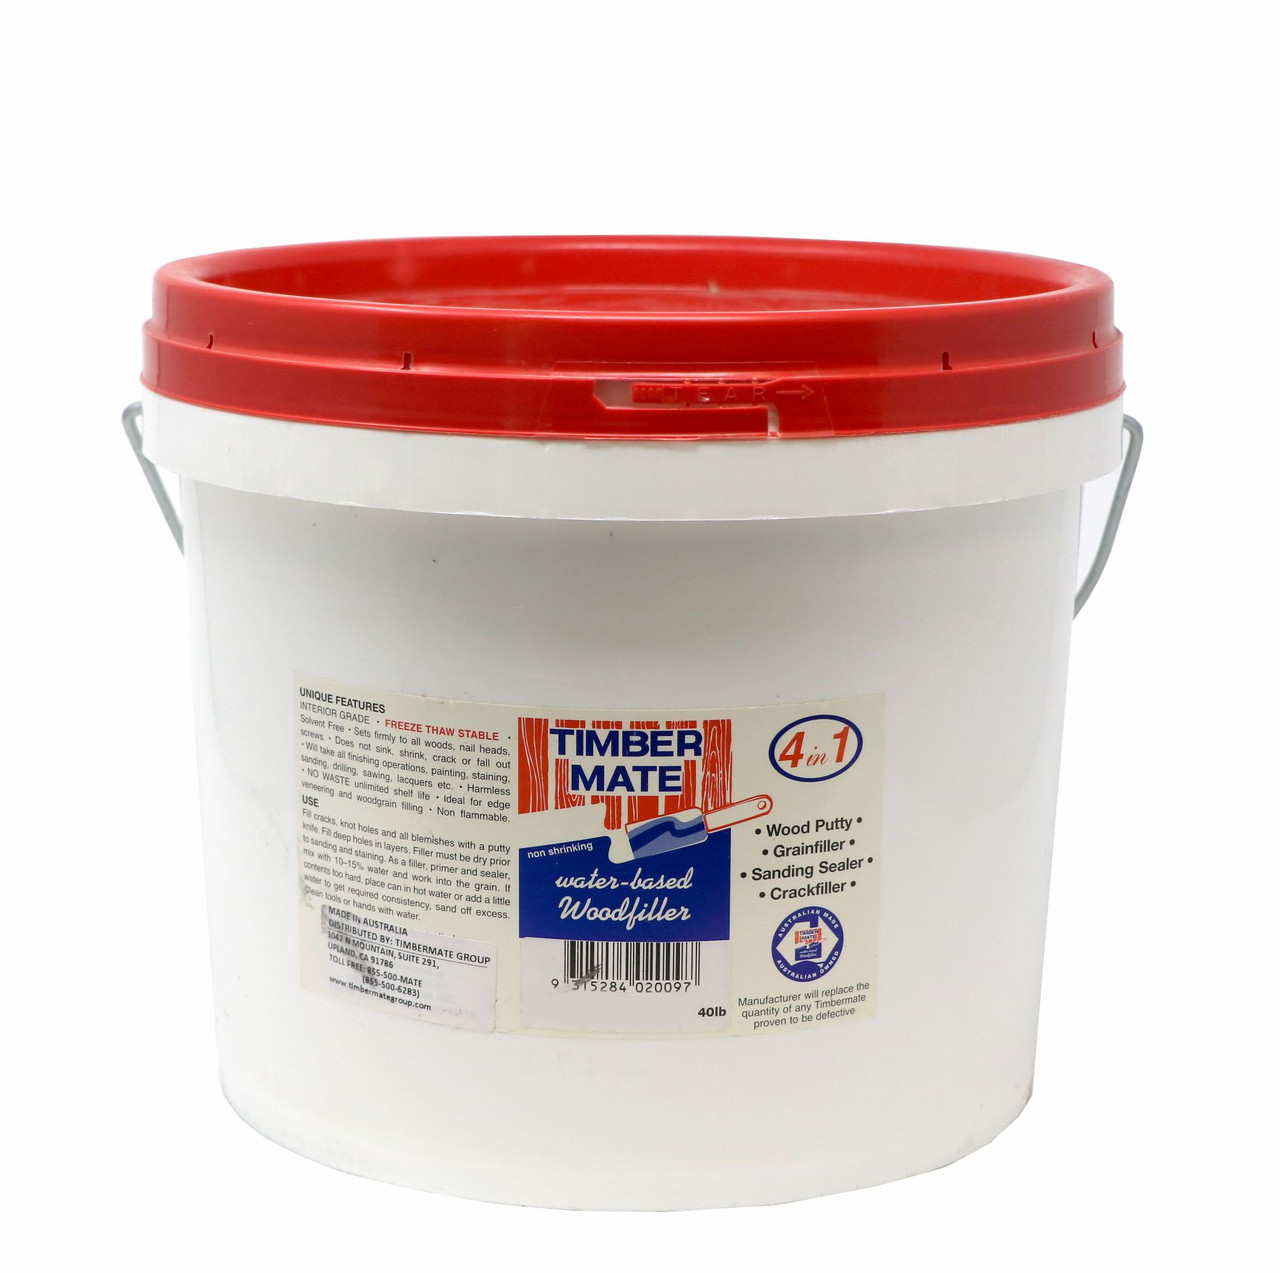 2.5 gallon bucket, 2.5 gallon bucket Suppliers and Manufacturers at